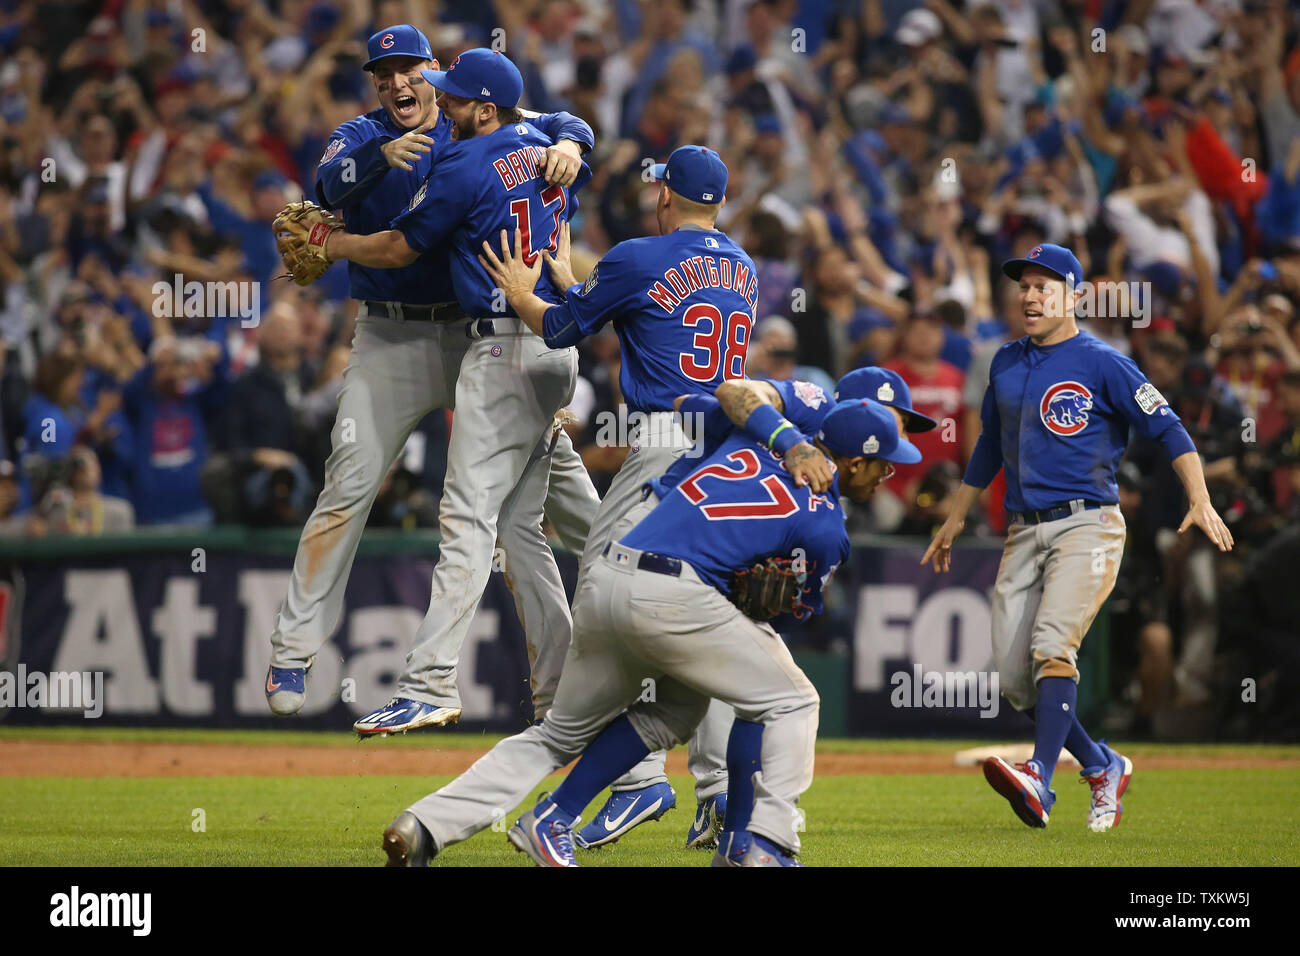 Chicago Cubs win World Series championship with 8-7 victory over